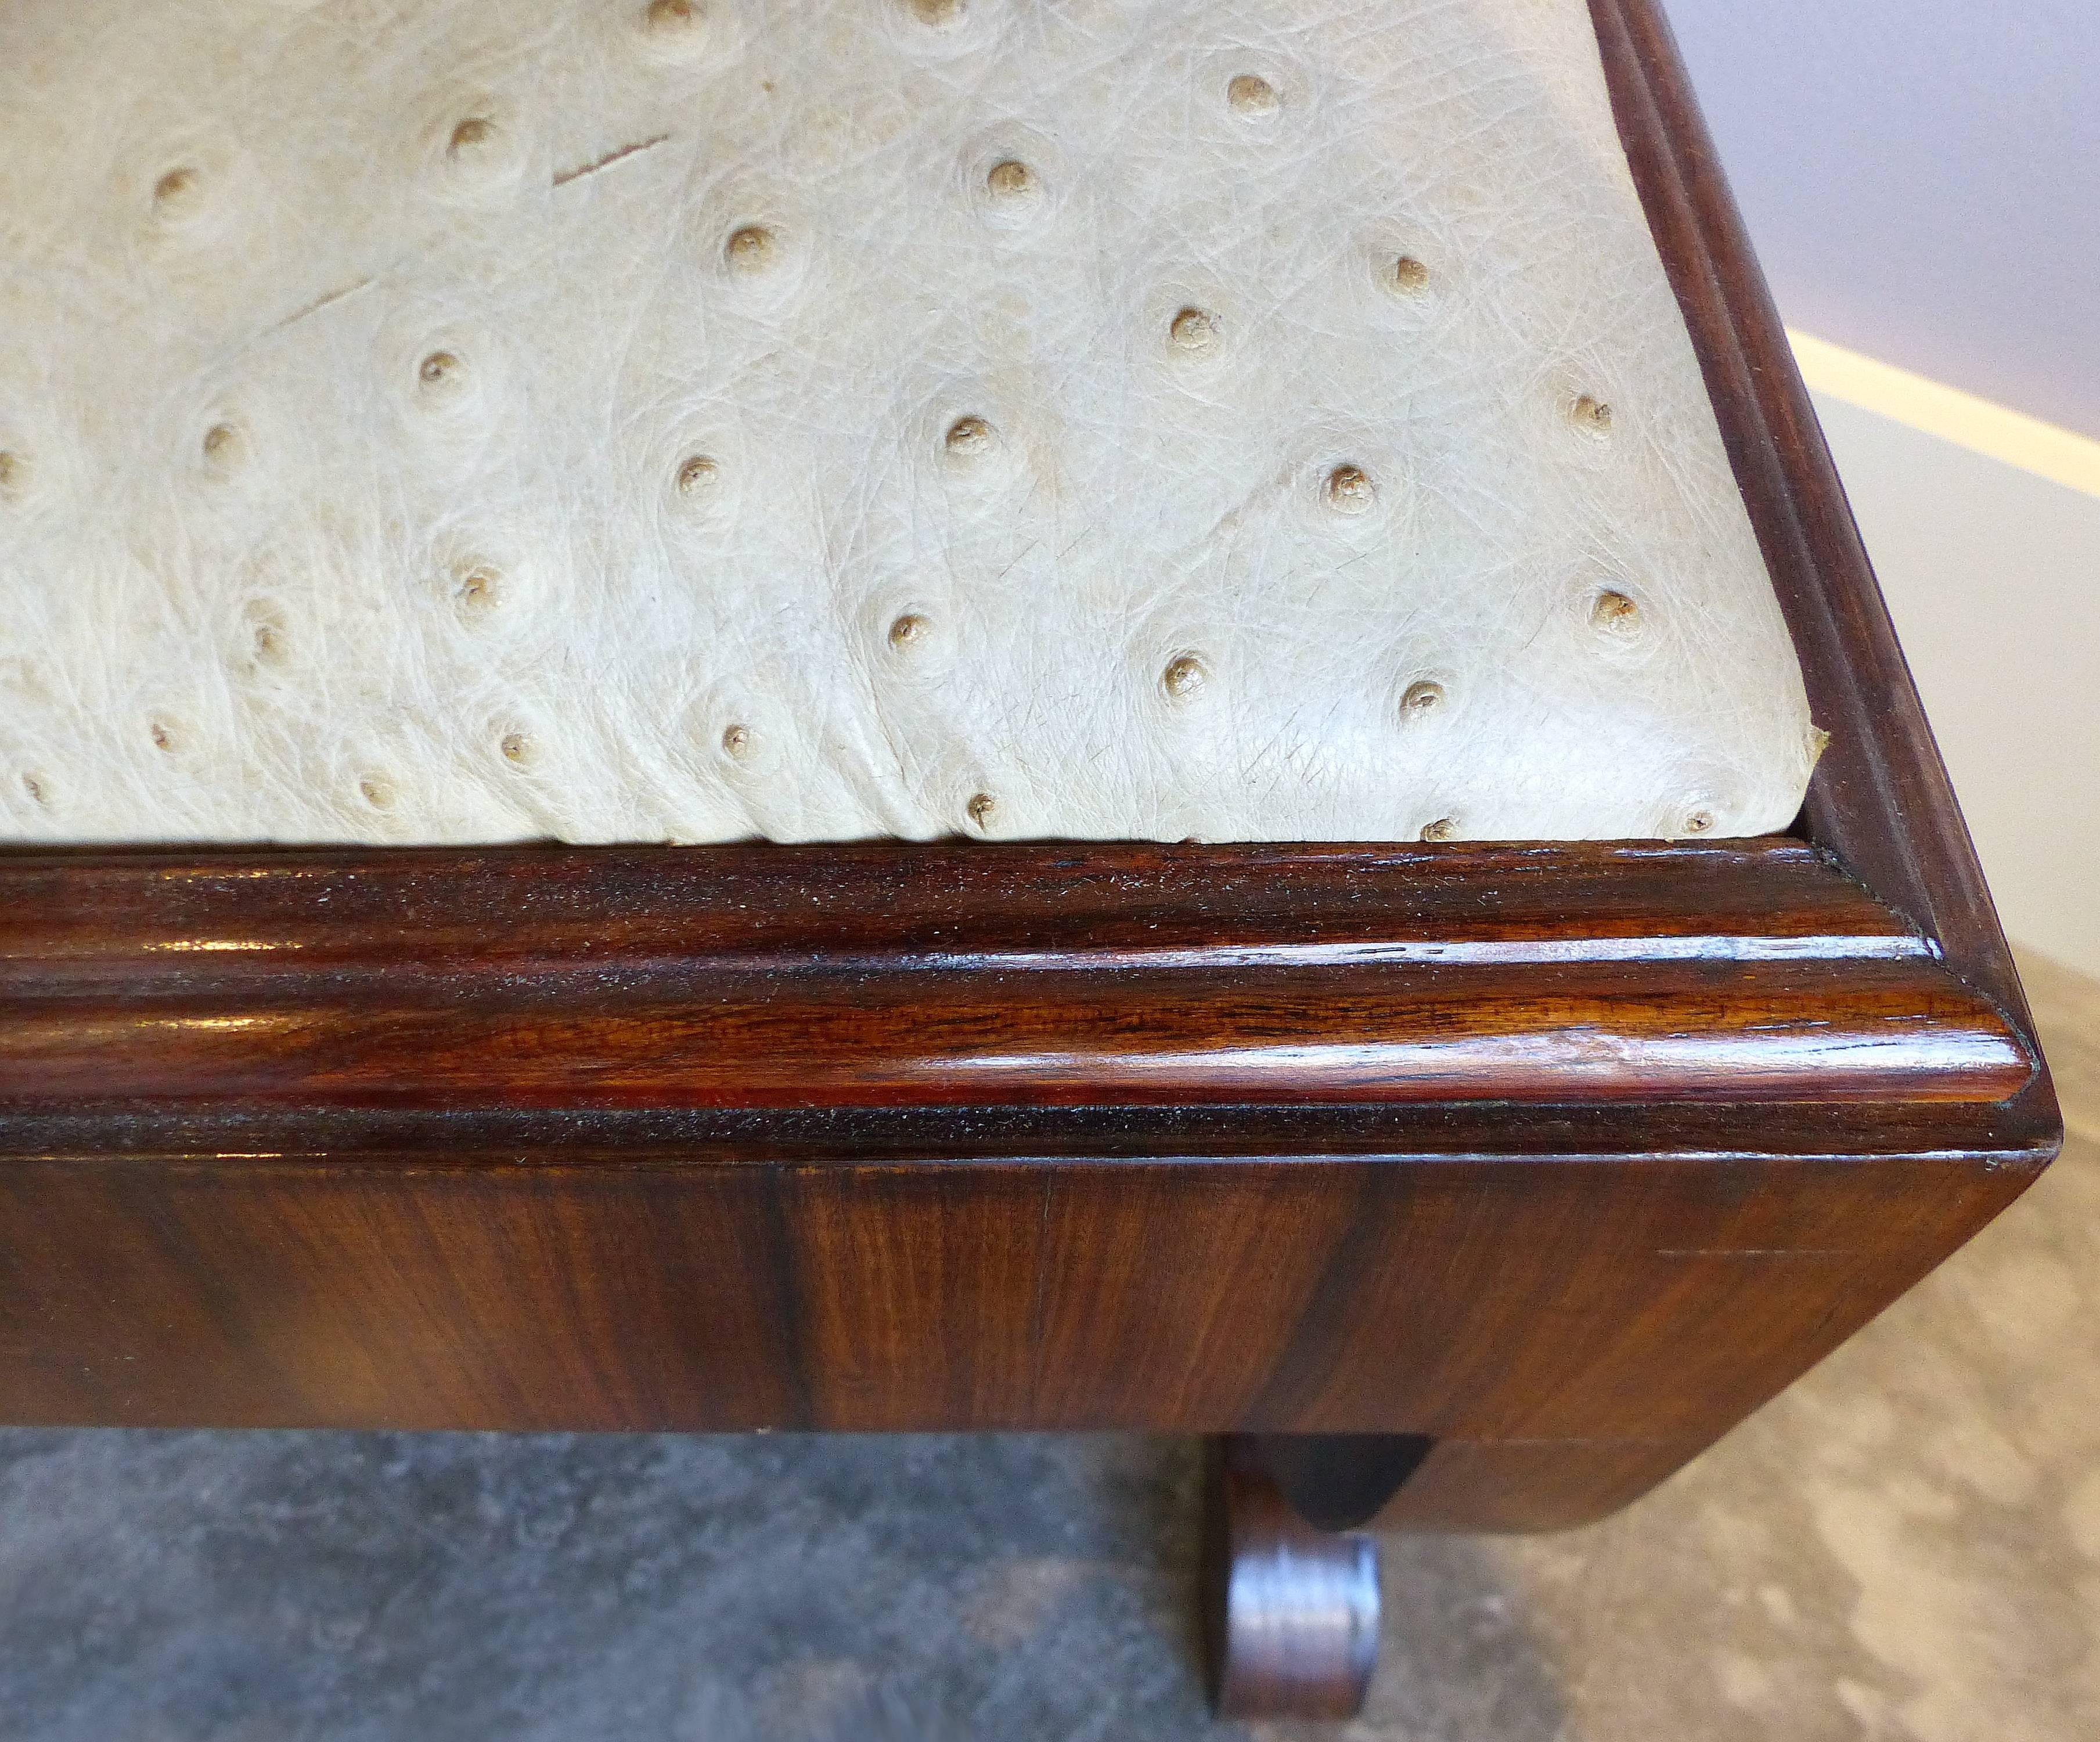 20th Century Art Deco Mahogany Footstools with Ostrich Skin Upholstery